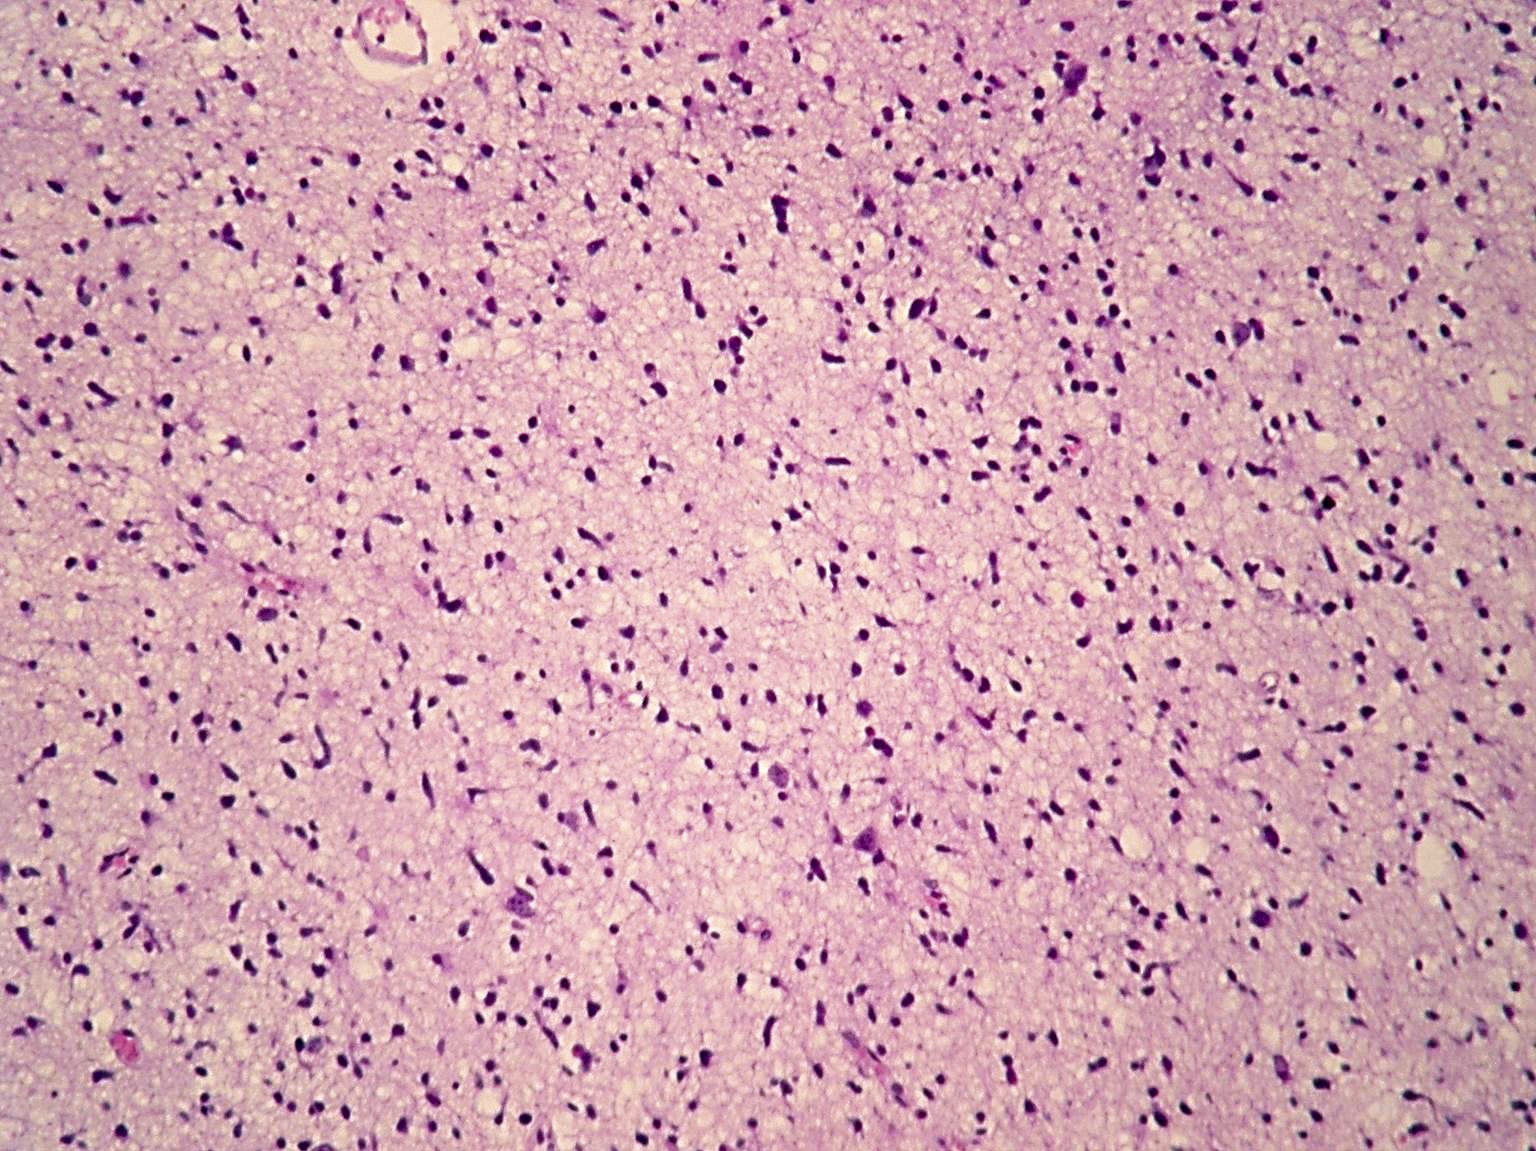 Diffuse astrocytoma, NOS: low power